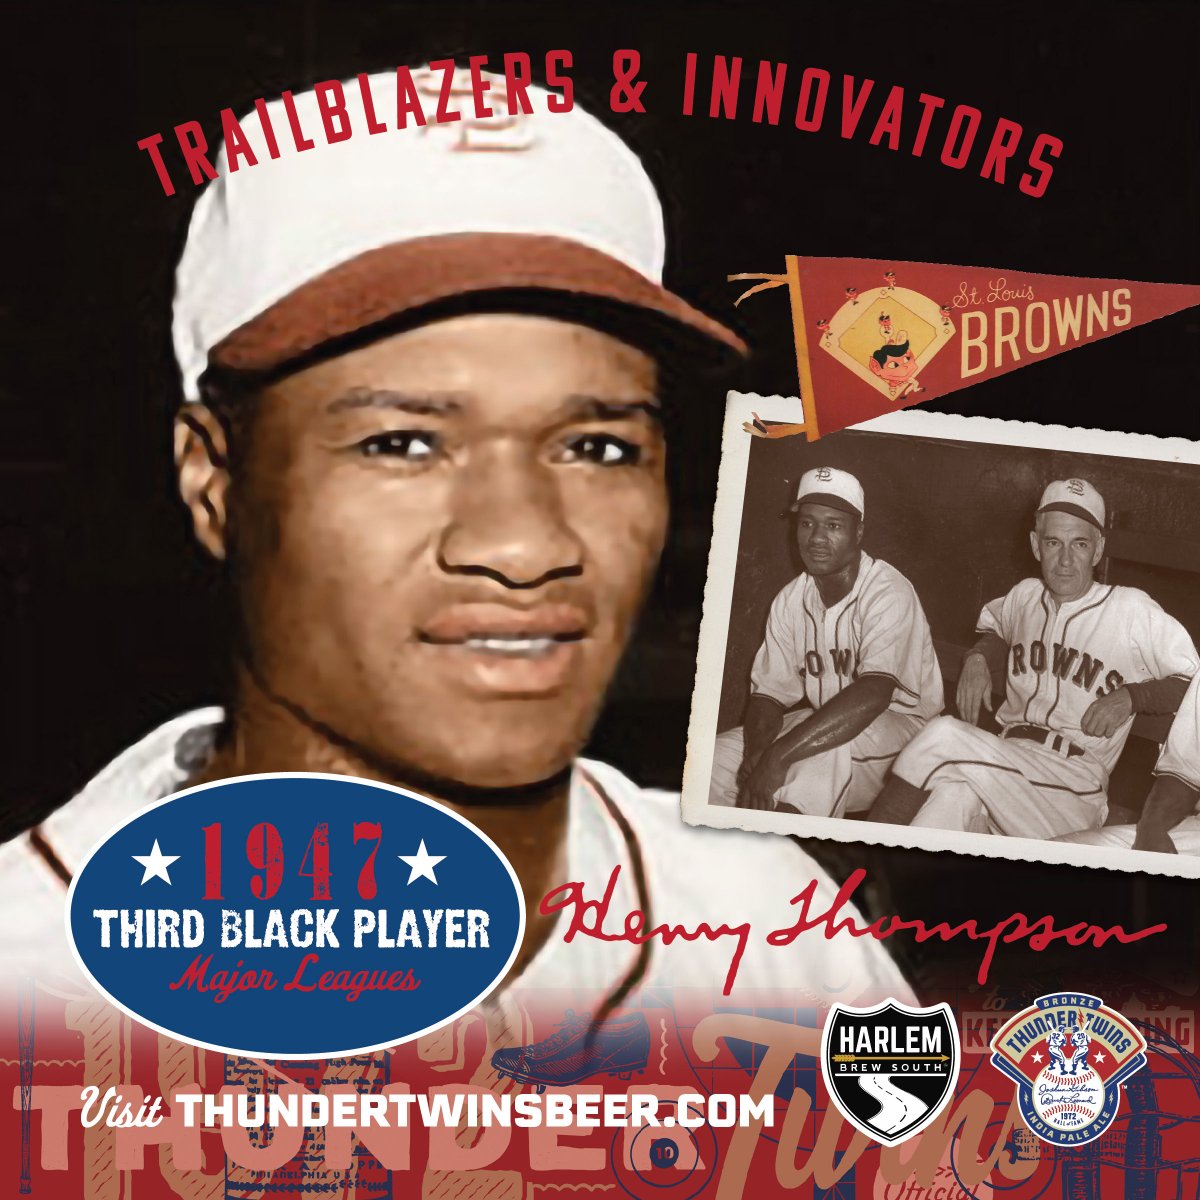 #OTD in 1947. Former @kscitymonarchs star #HankThompson became the 3rd Black player in modern @MLB history. He made his debut with the #StLouisBrowns just 3 months after #JackieRobinson & only 12 days after #LarryDoby. #NegroLeagues #Trailblazers #thundertwinsbeer @harlembrewing